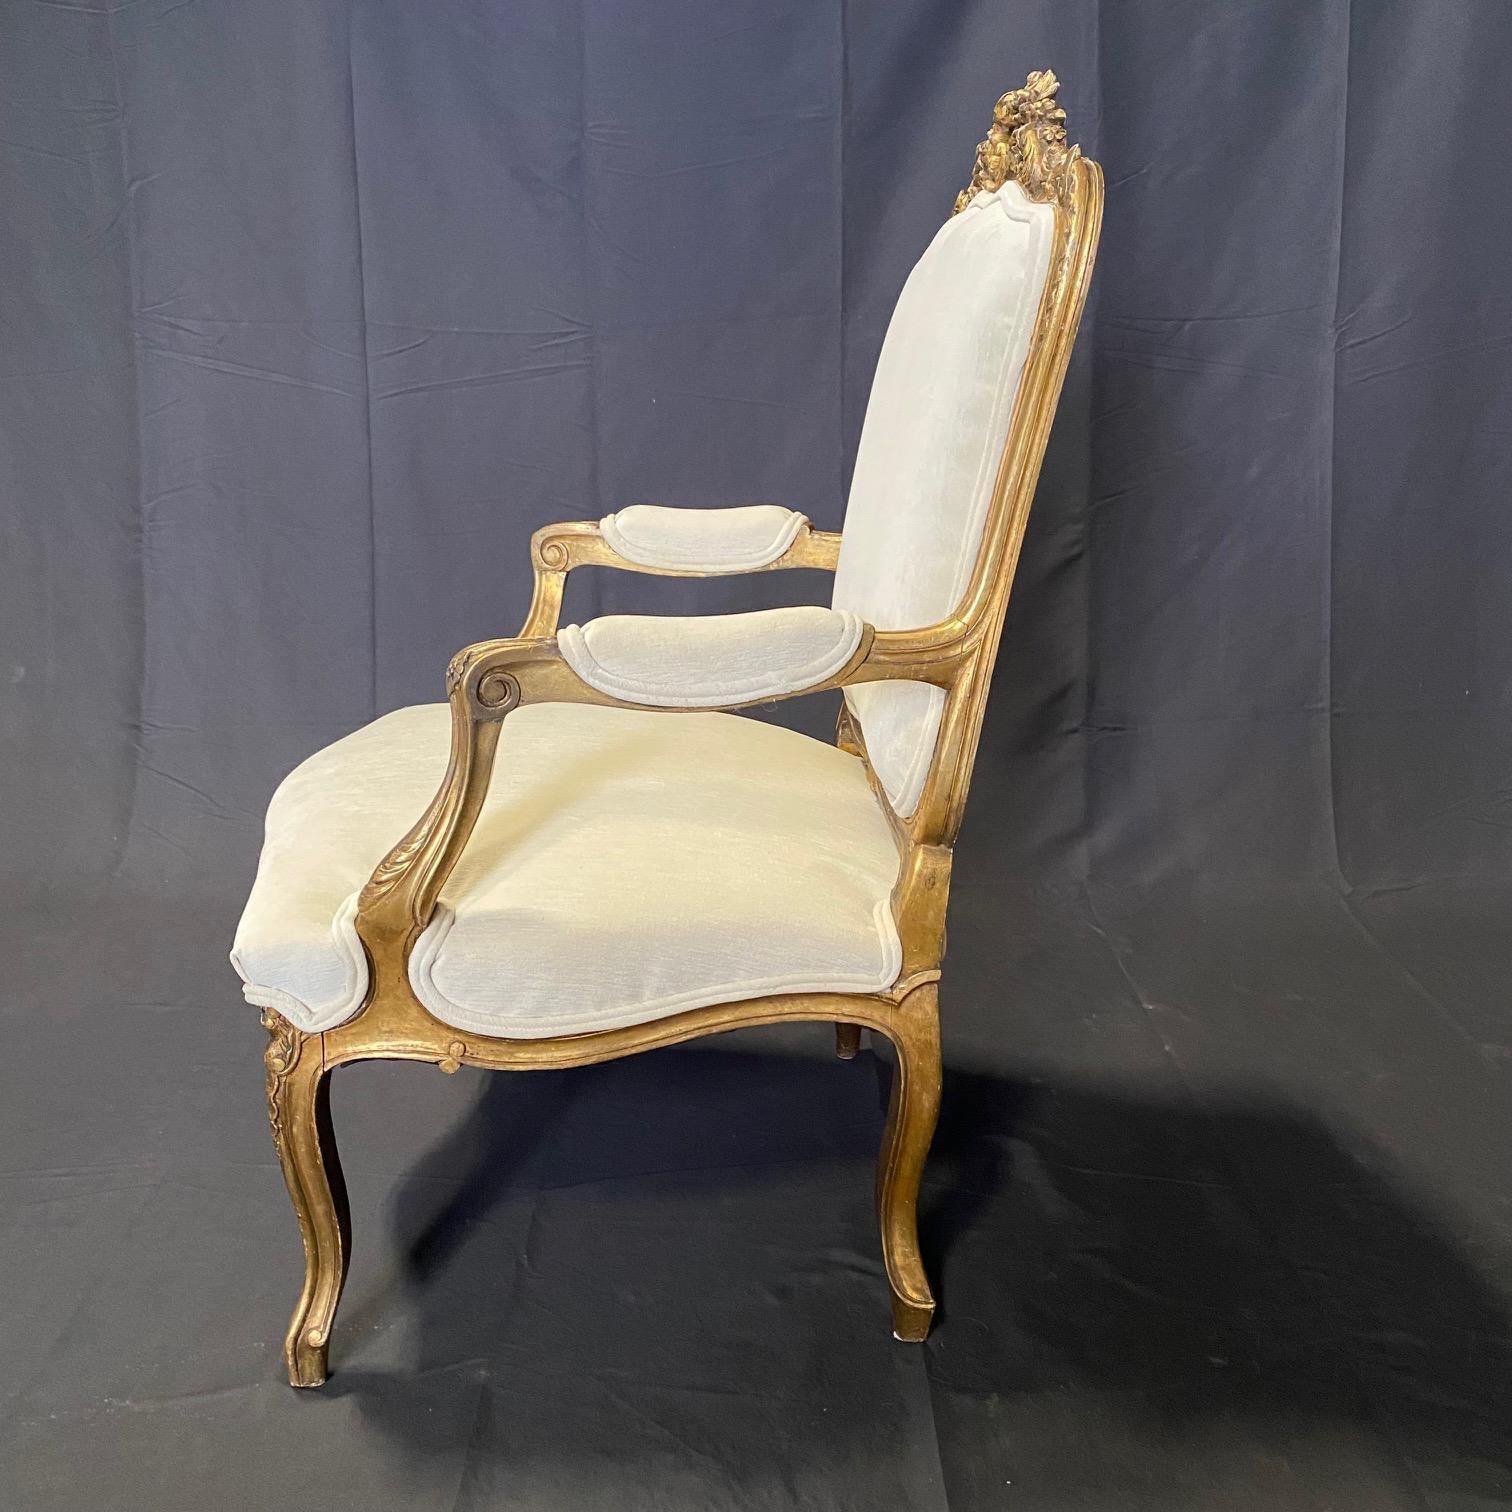  Pair of Antique French Louis XV Fauteuil Gilded Arm Chairs  4